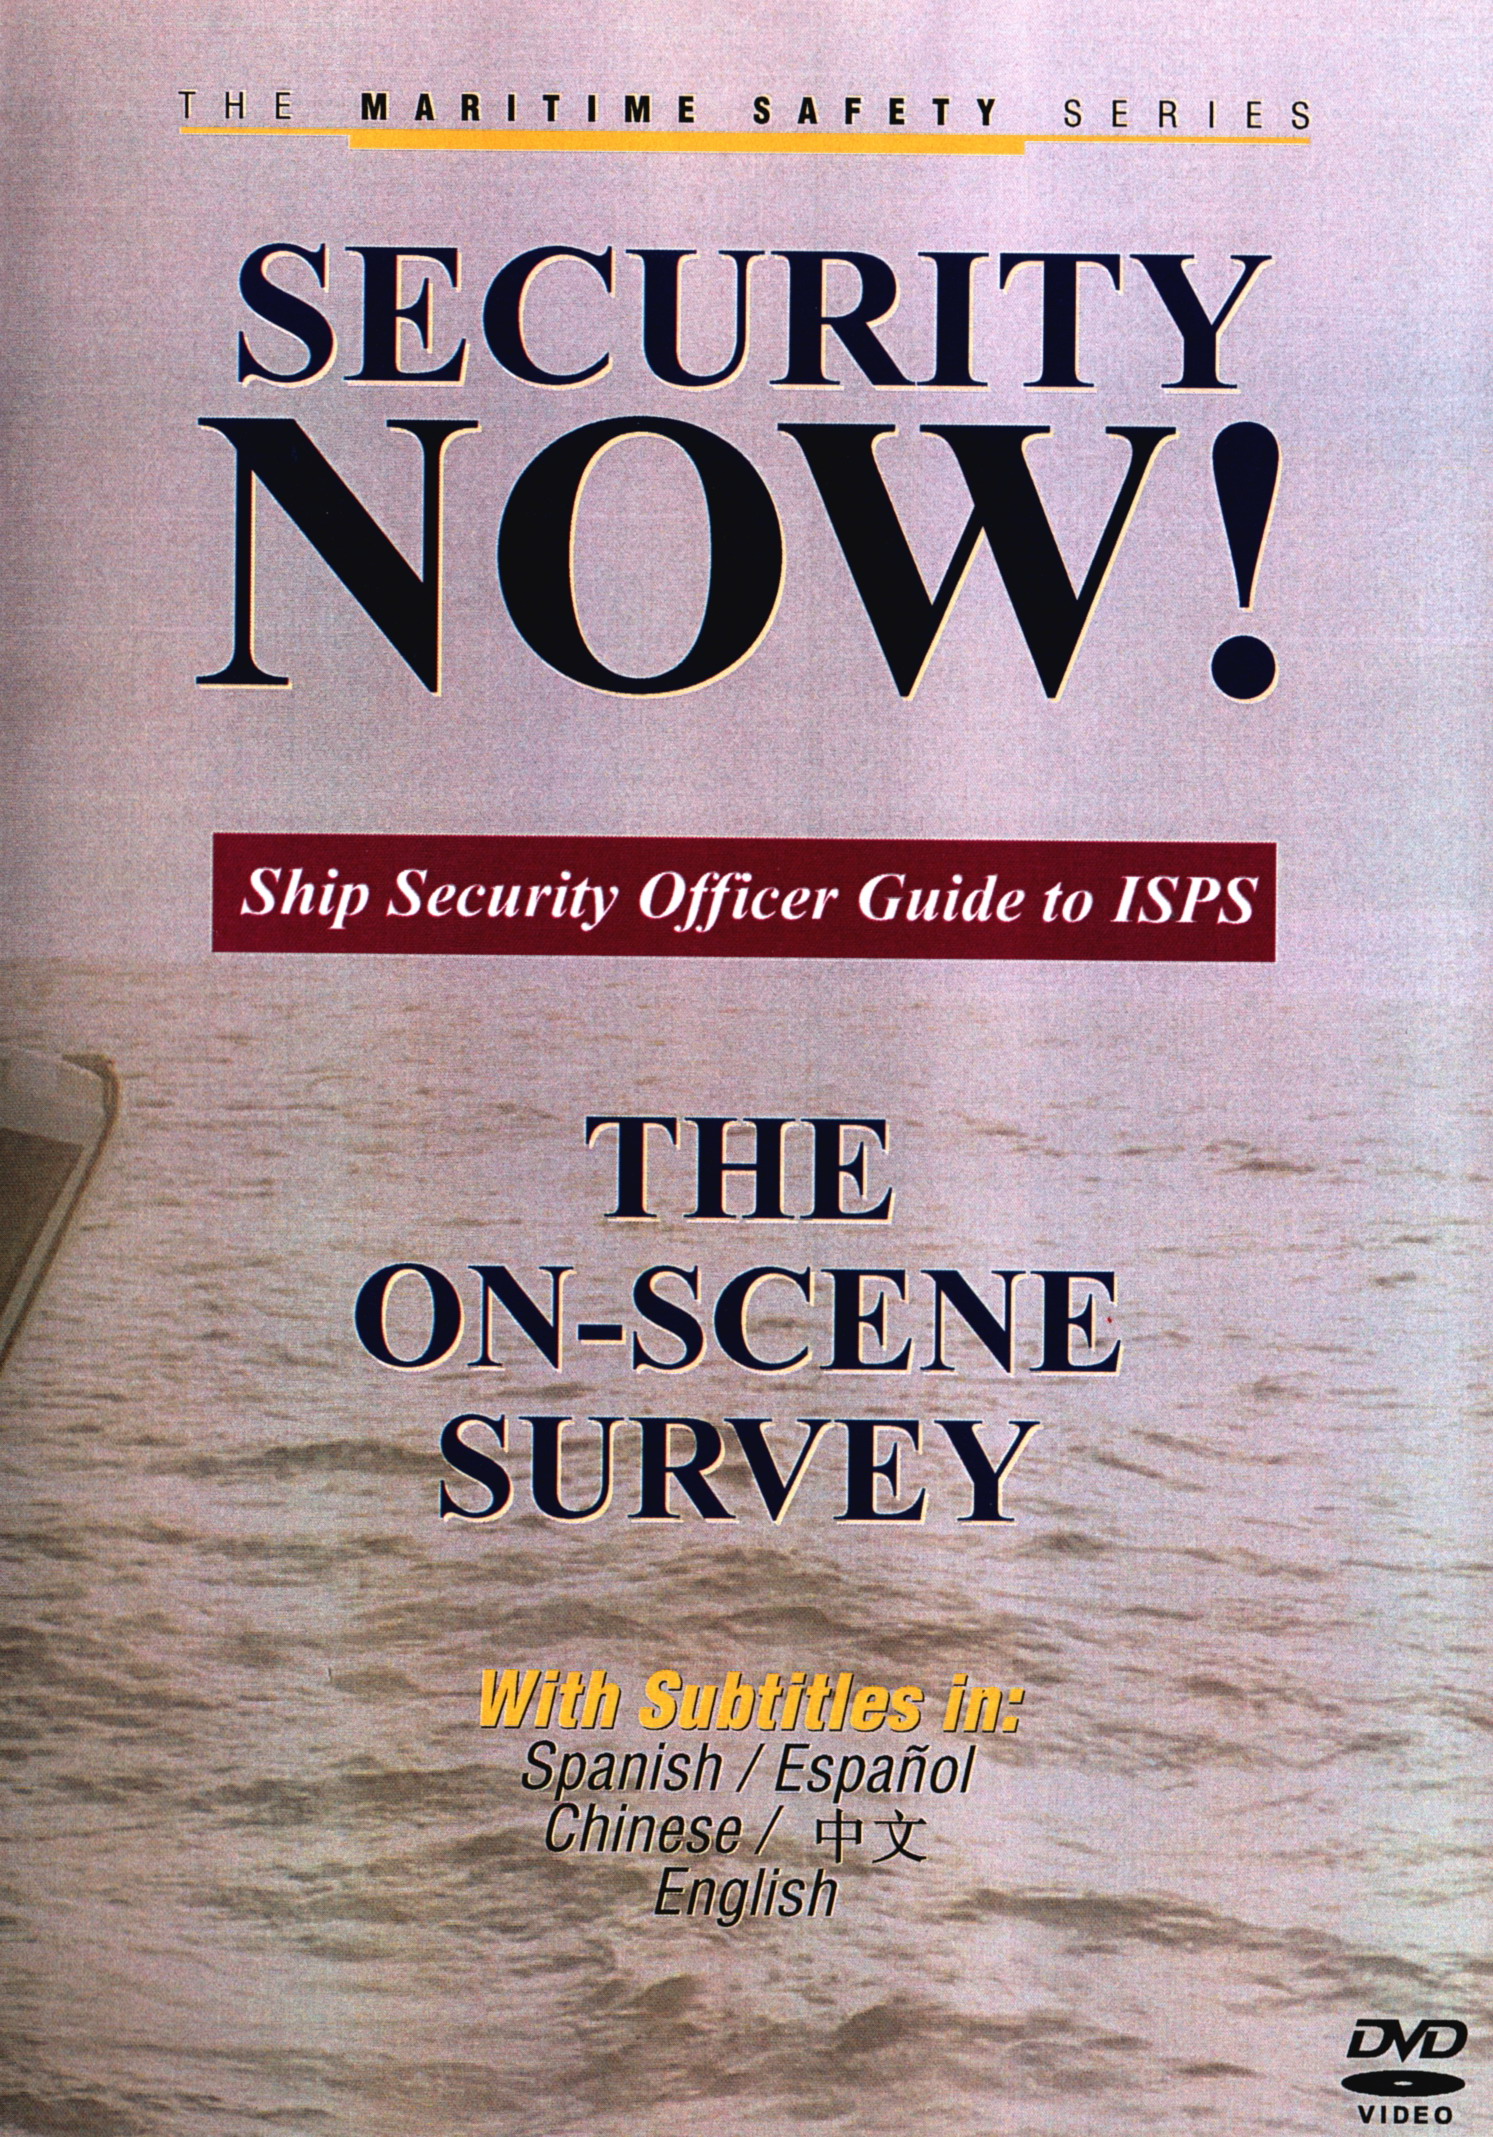 Security NOW! The On-Scene Survey